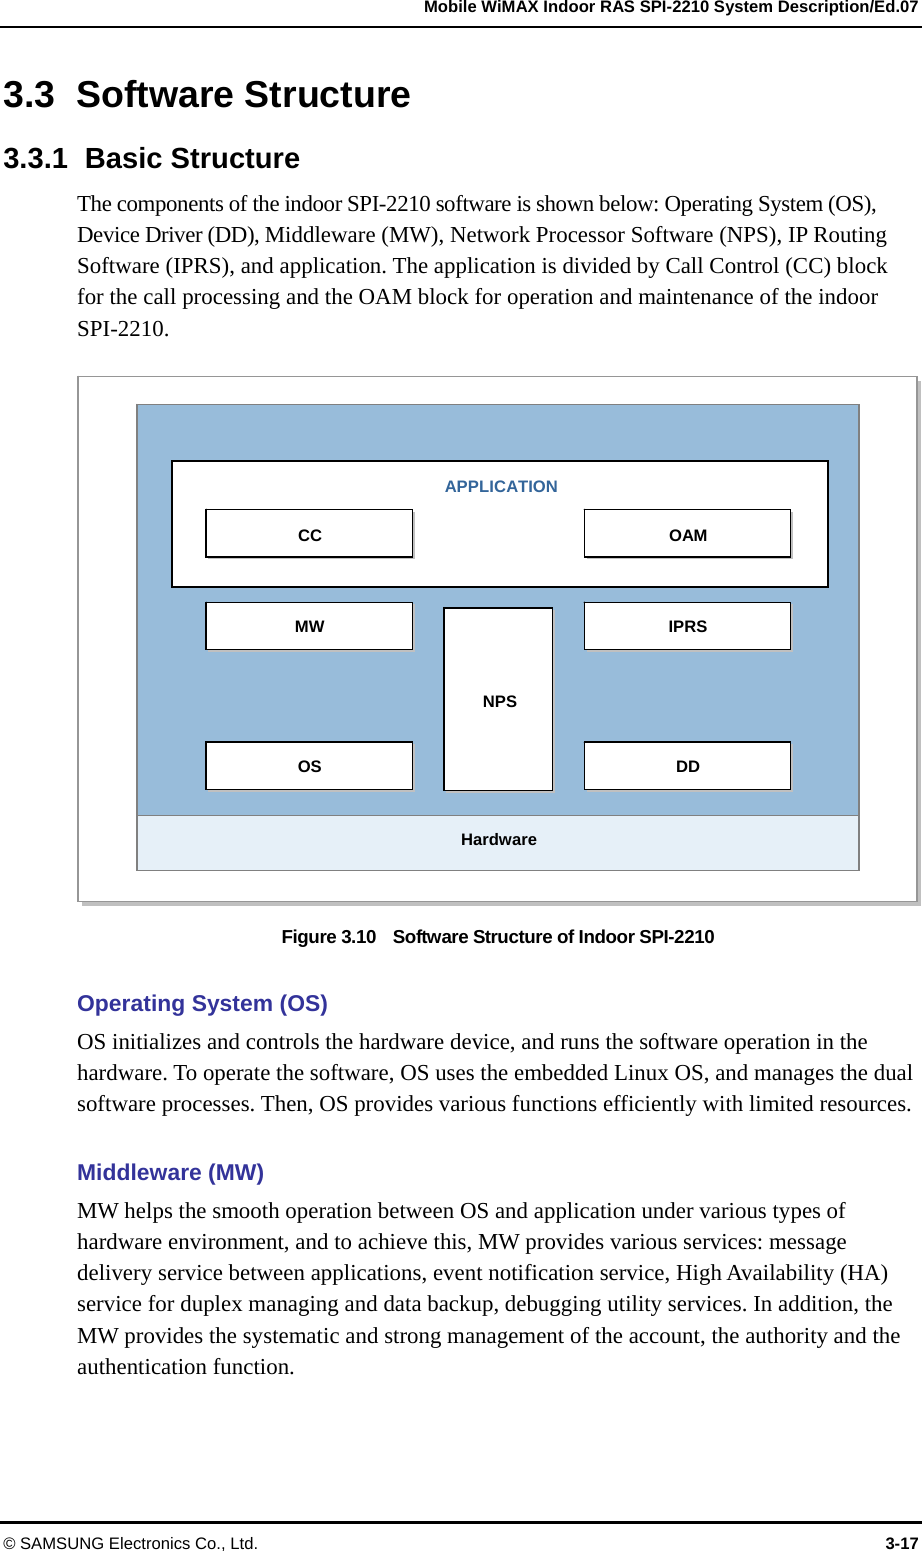   Mobile WiMAX Indoor RAS SPI-2210 System Description/Ed.07 © SAMSUNG Electronics Co., Ltd.  3-17 3.3 Software Structure 3.3.1 Basic Structure The components of the indoor SPI-2210 software is shown below: Operating System (OS), Device Driver (DD), Middleware (MW), Network Processor Software (NPS), IP Routing Software (IPRS), and application. The application is divided by Call Control (CC) block for the call processing and the OAM block for operation and maintenance of the indoor SPI-2210.  Figure 3.10    Software Structure of Indoor SPI-2210  Operating System (OS) OS initializes and controls the hardware device, and runs the software operation in the hardware. To operate the software, OS uses the embedded Linux OS, and manages the dual software processes. Then, OS provides various functions efficiently with limited resources.    Middleware (MW) MW helps the smooth operation between OS and application under various types of hardware environment, and to achieve this, MW provides various services: message delivery service between applications, event notification service, High Availability (HA) service for duplex managing and data backup, debugging utility services. In addition, the MW provides the systematic and strong management of the account, the authority and the authentication function.  MW IPRS OS DD NPS Hardware OAM CC APPLICATION 